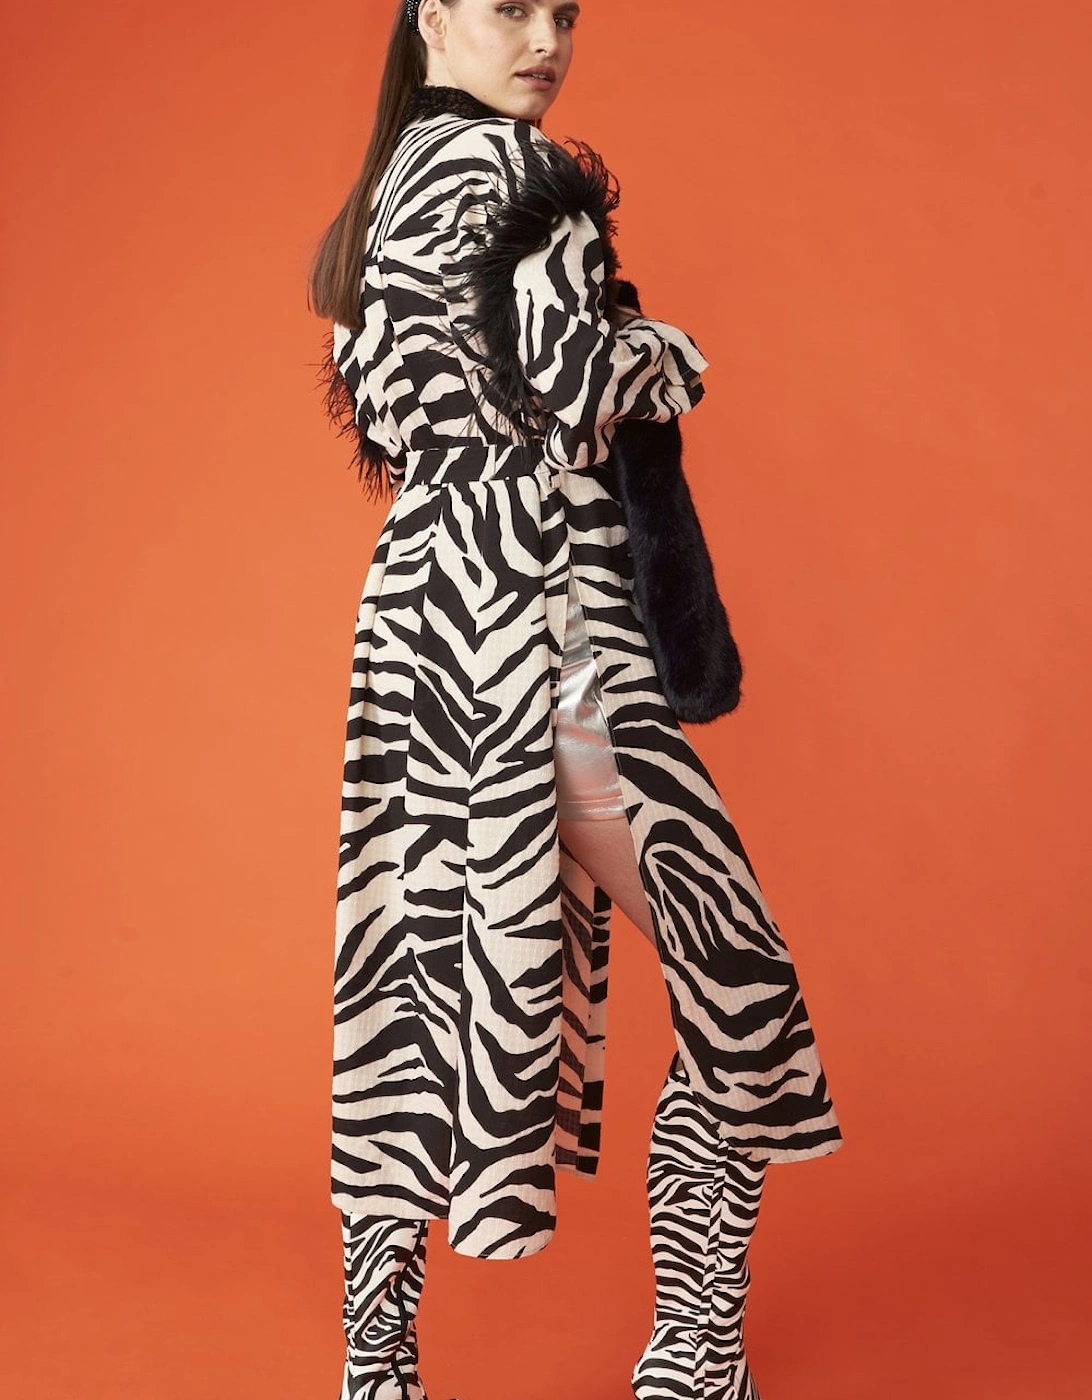 Zebra Trench Coat with Feather Trim and Embellished Collar